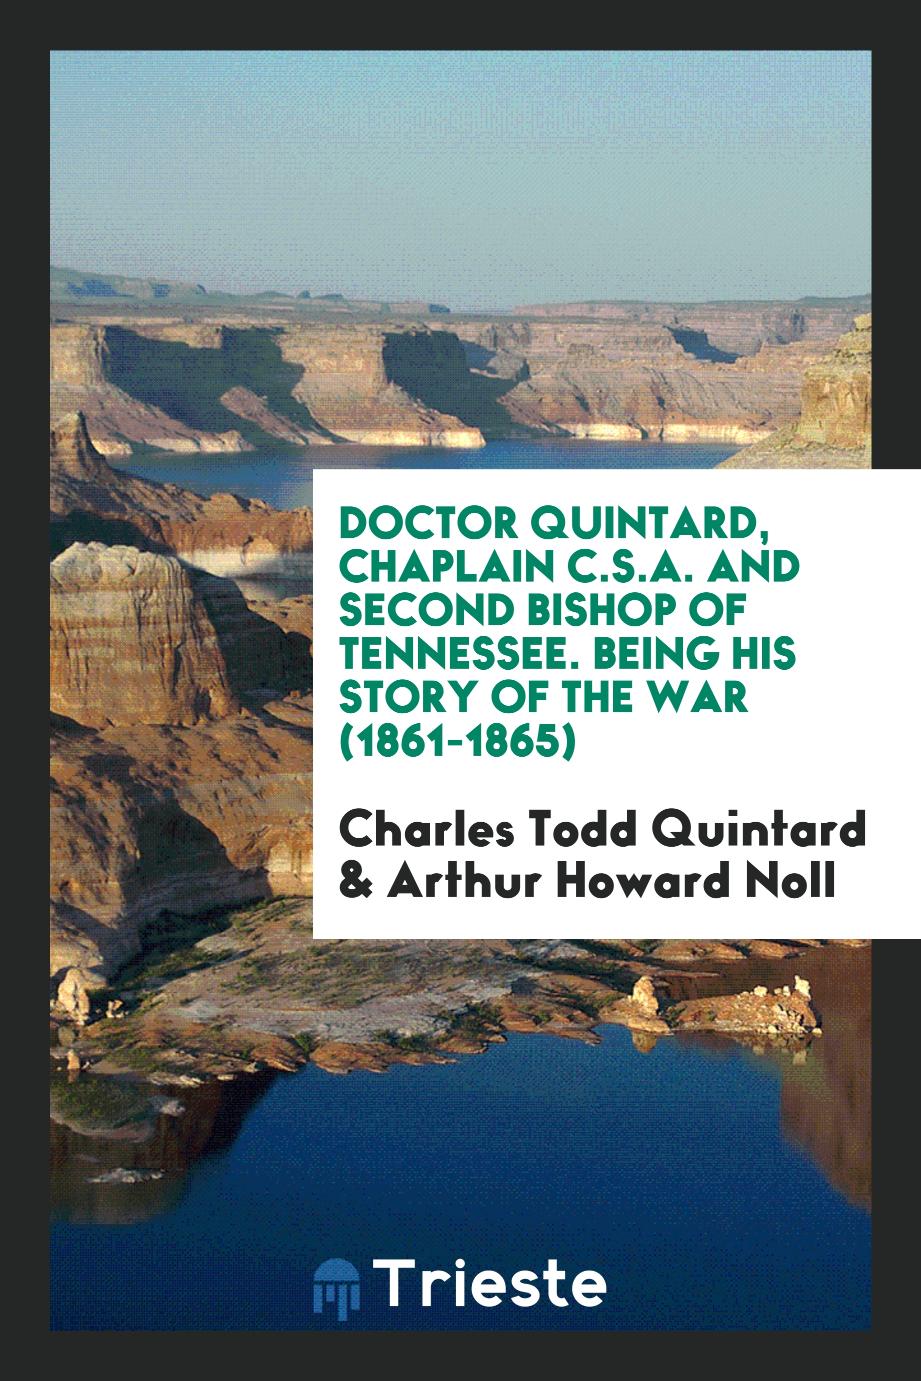 Doctor Quintard, Chaplain C.S.A. And Second Bishop of Tennessee. Being His Story of the War (1861-1865)